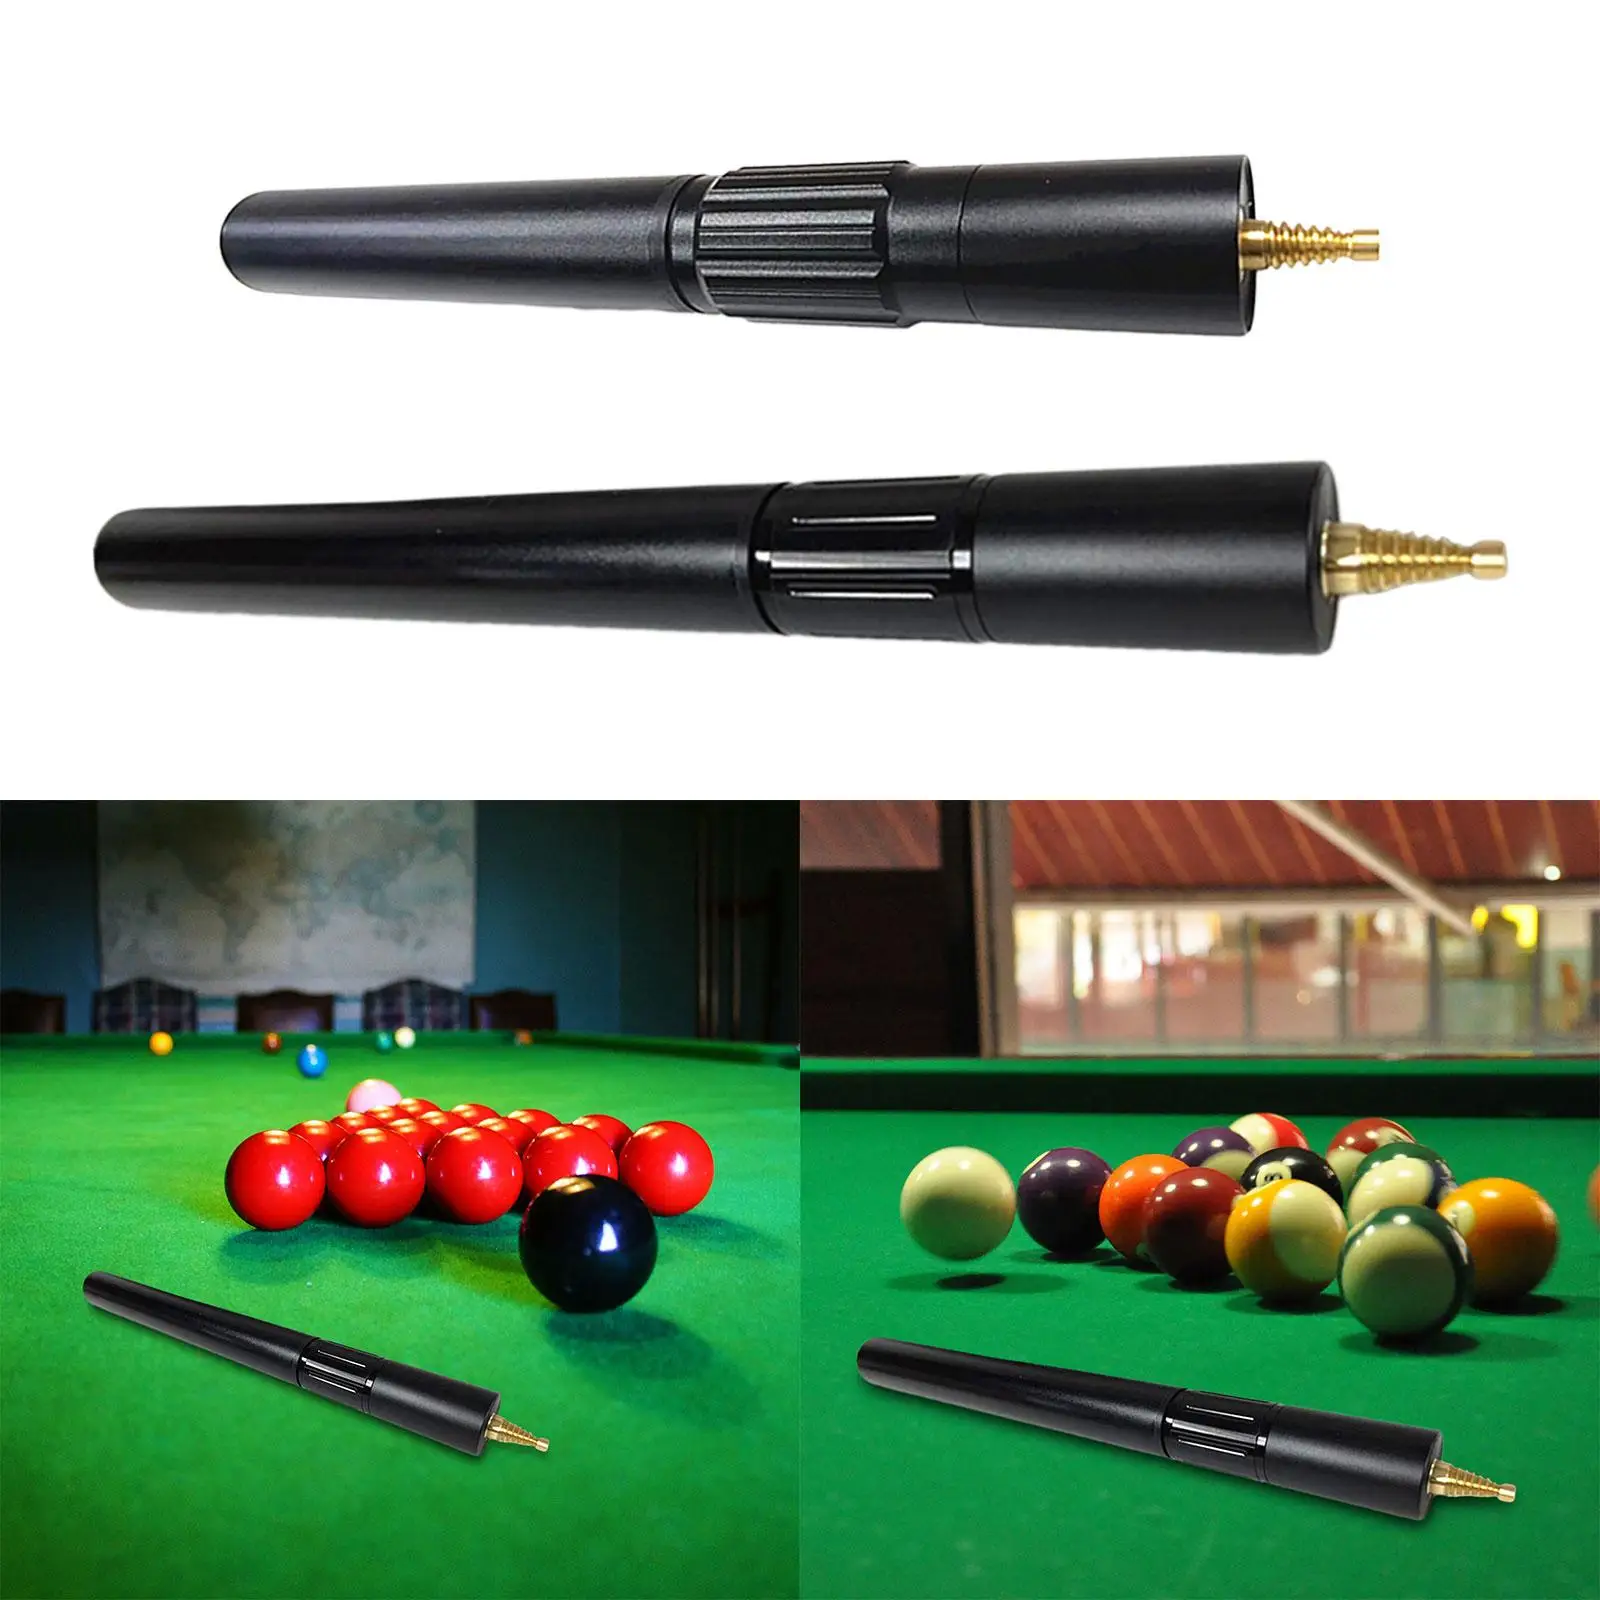 Billiards Cue Extension Cue End Lengthener Telescopic Professional Snooker Pool Cue Extension for Practice Billiard Beginners